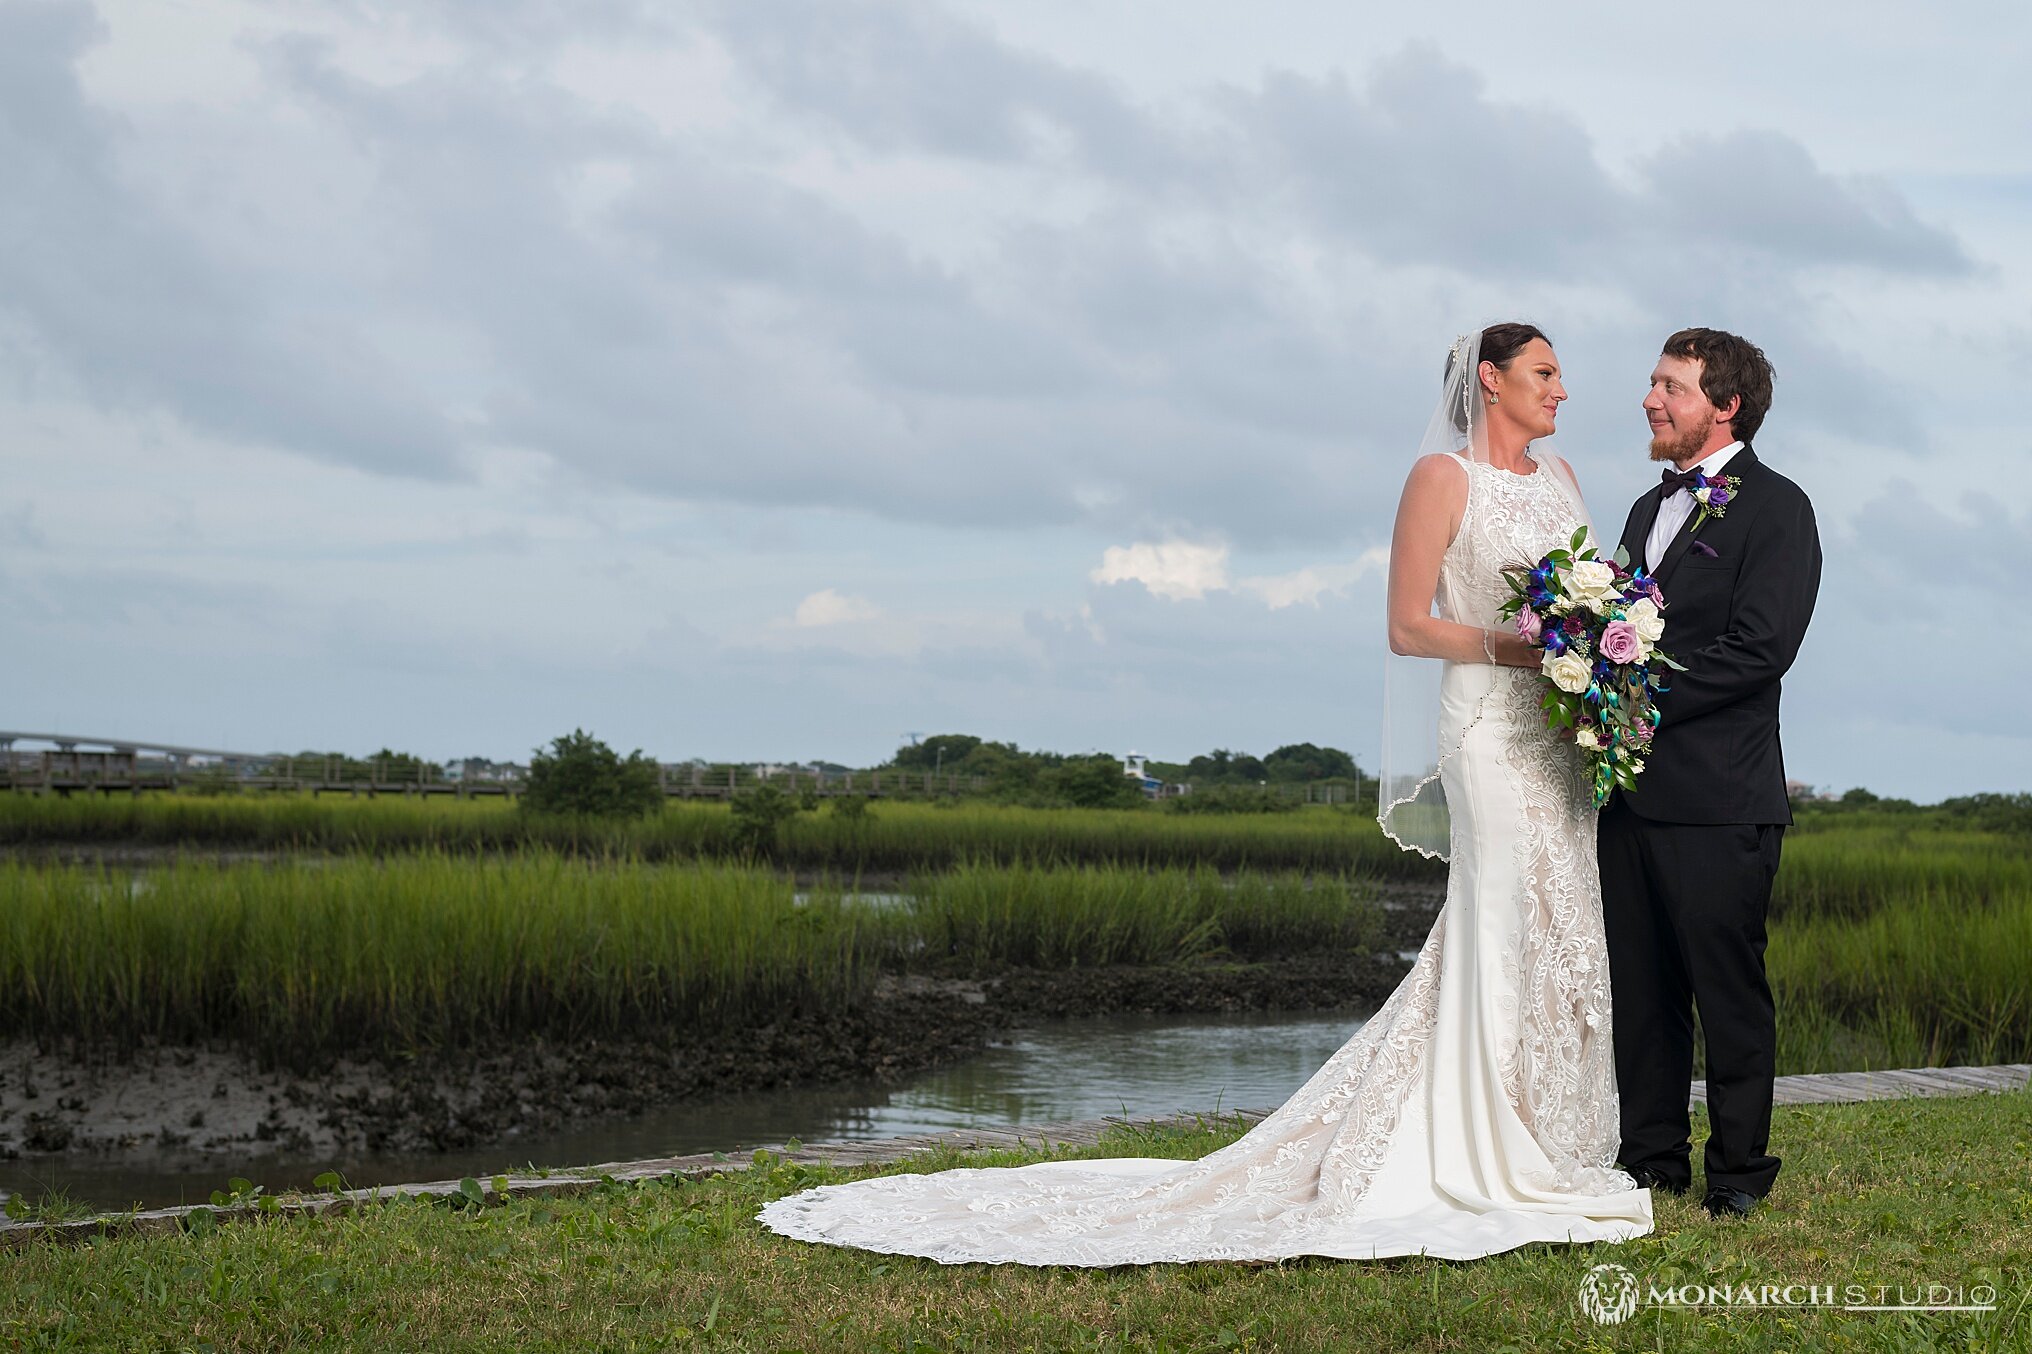 053-Affordable-Wedding-Photographer-in-st-augustine.jpg